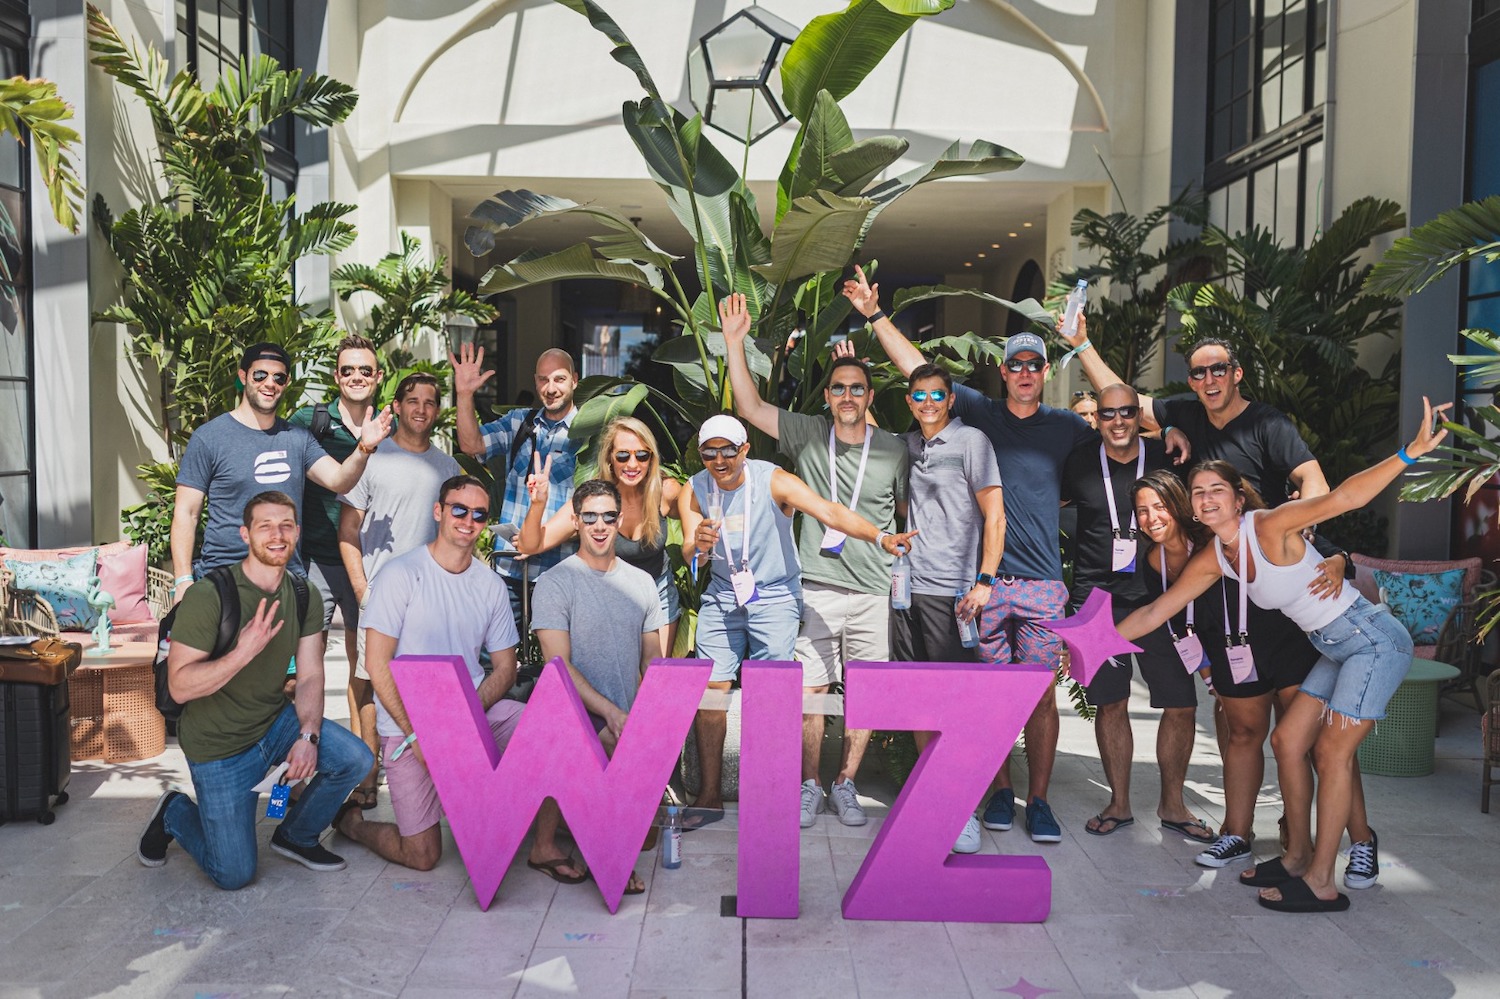 The Wiz team is pictured around a pink sculpture of the company logo.